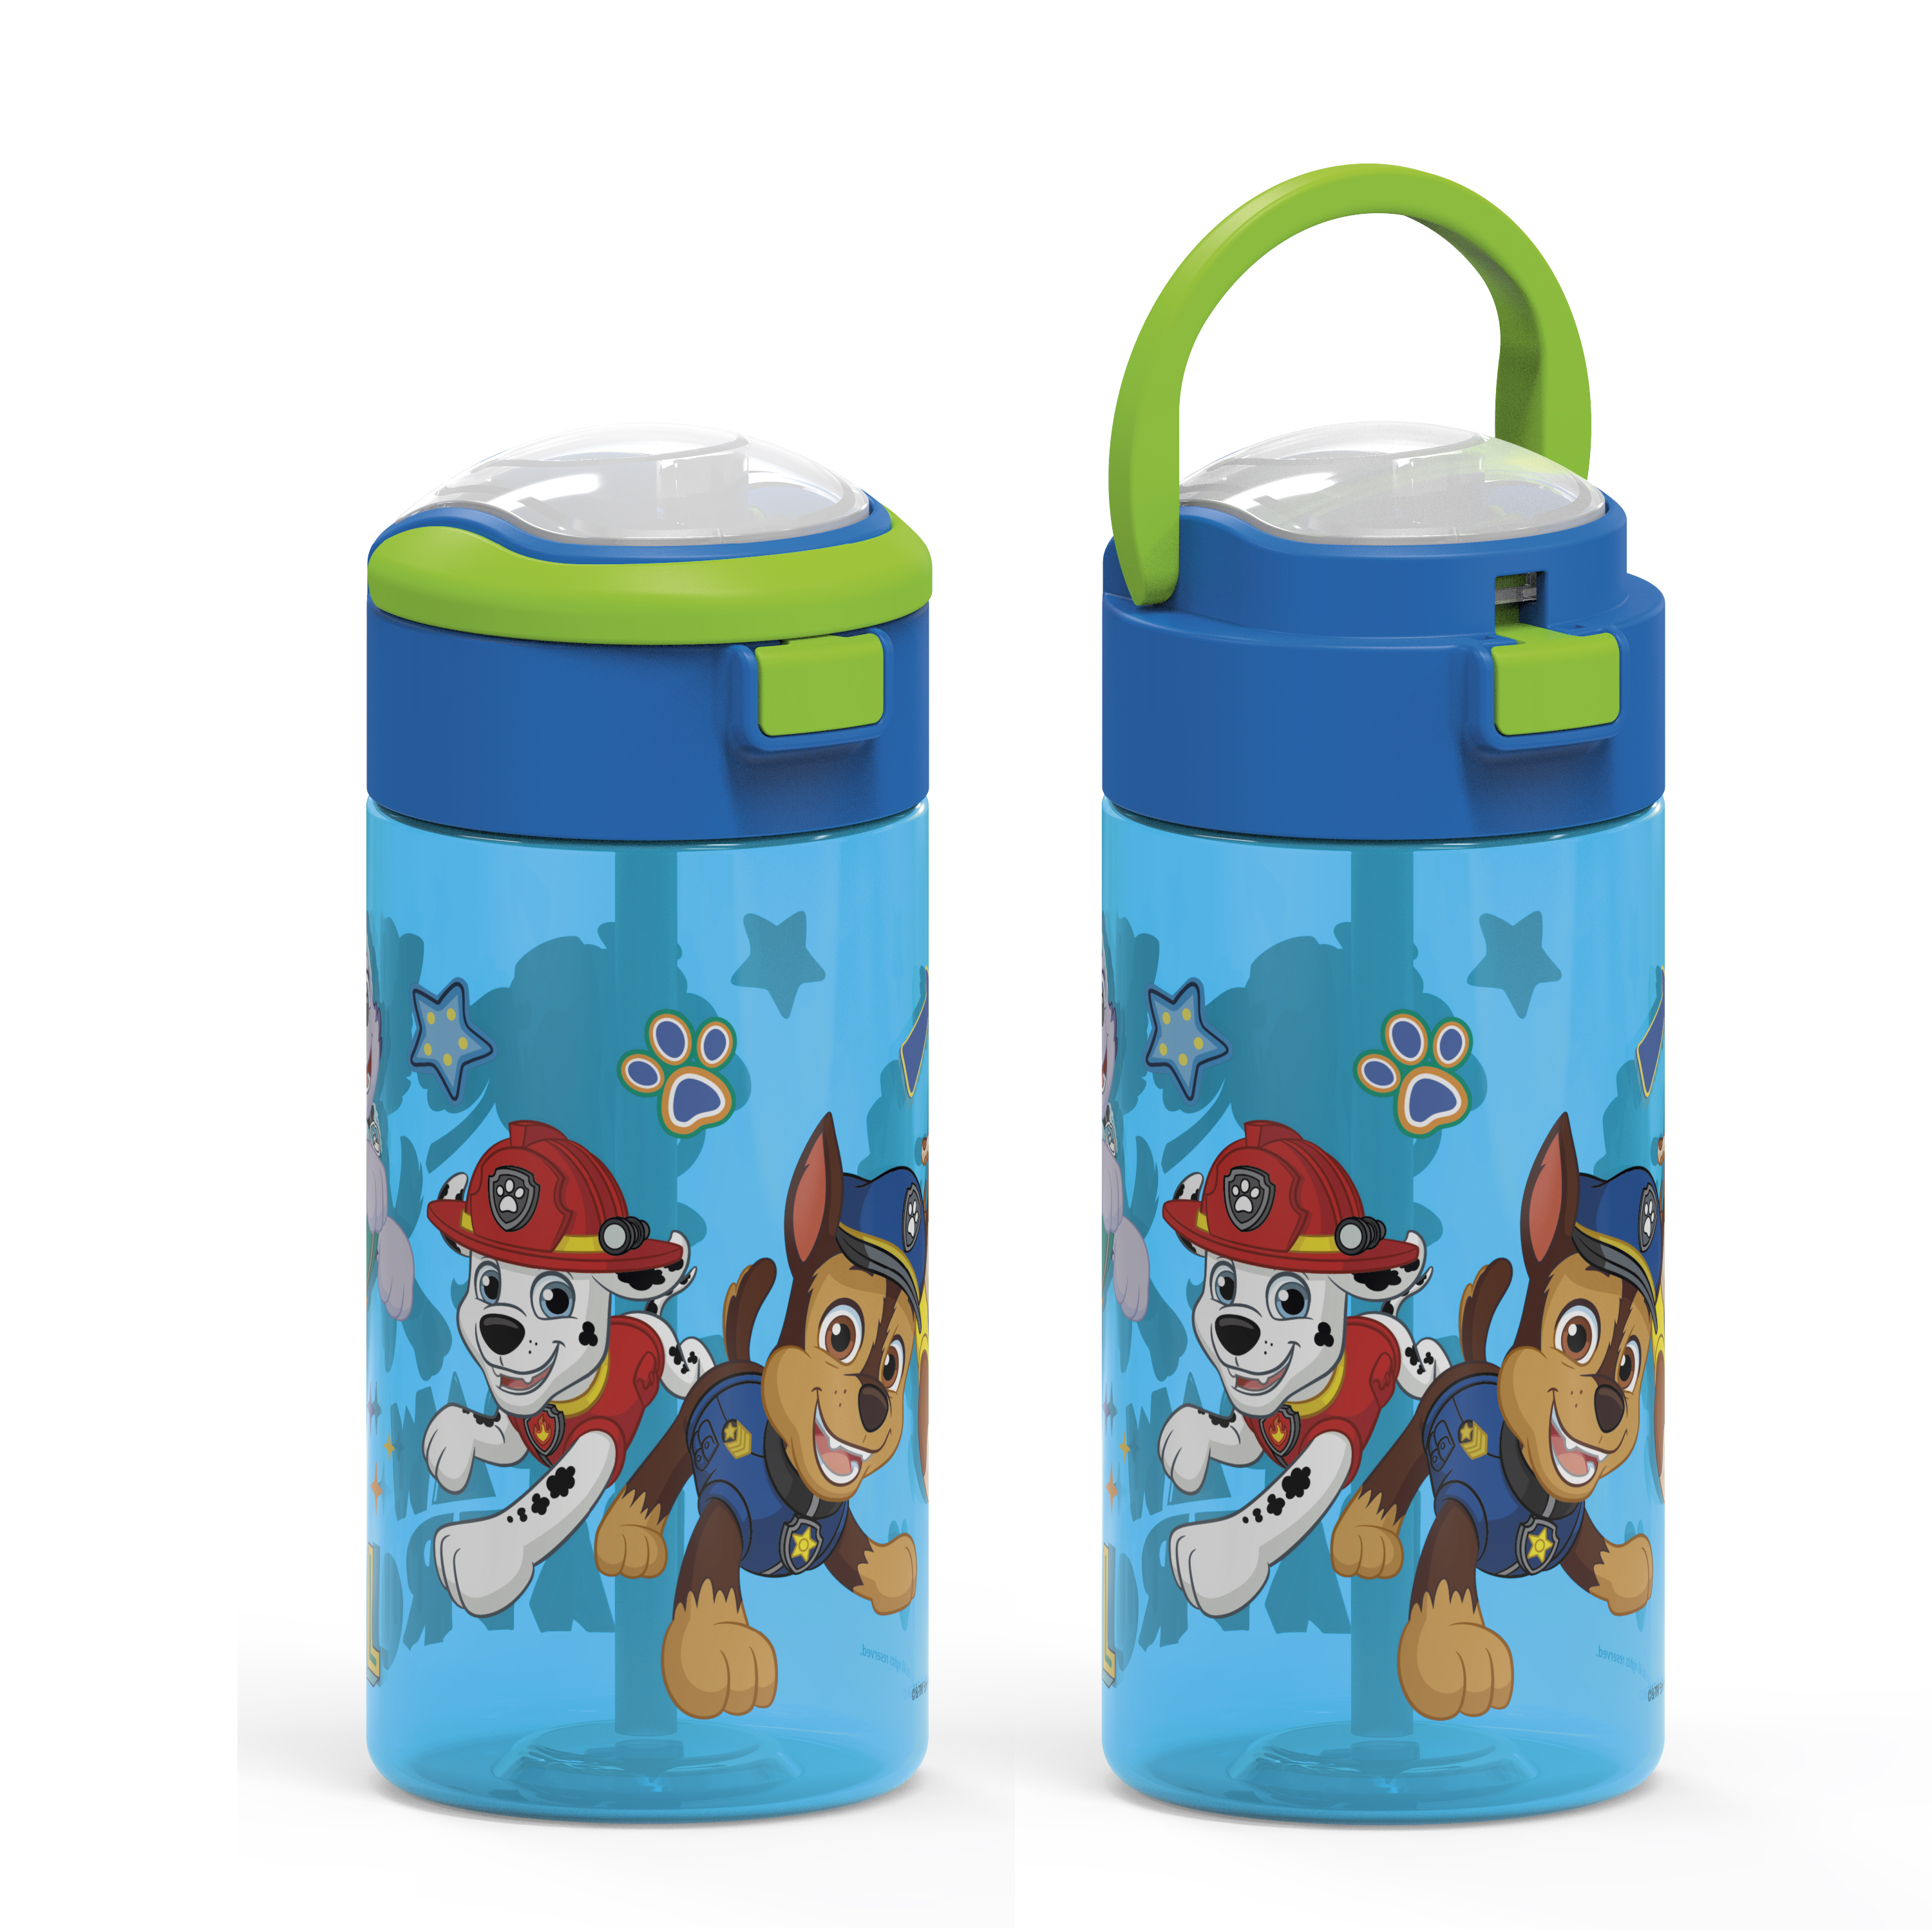 Paw Patrol 18 ounce Reusable Plastic Water Bottle with Push-button lid, Chase, Marshall & Rubble slideshow image 8